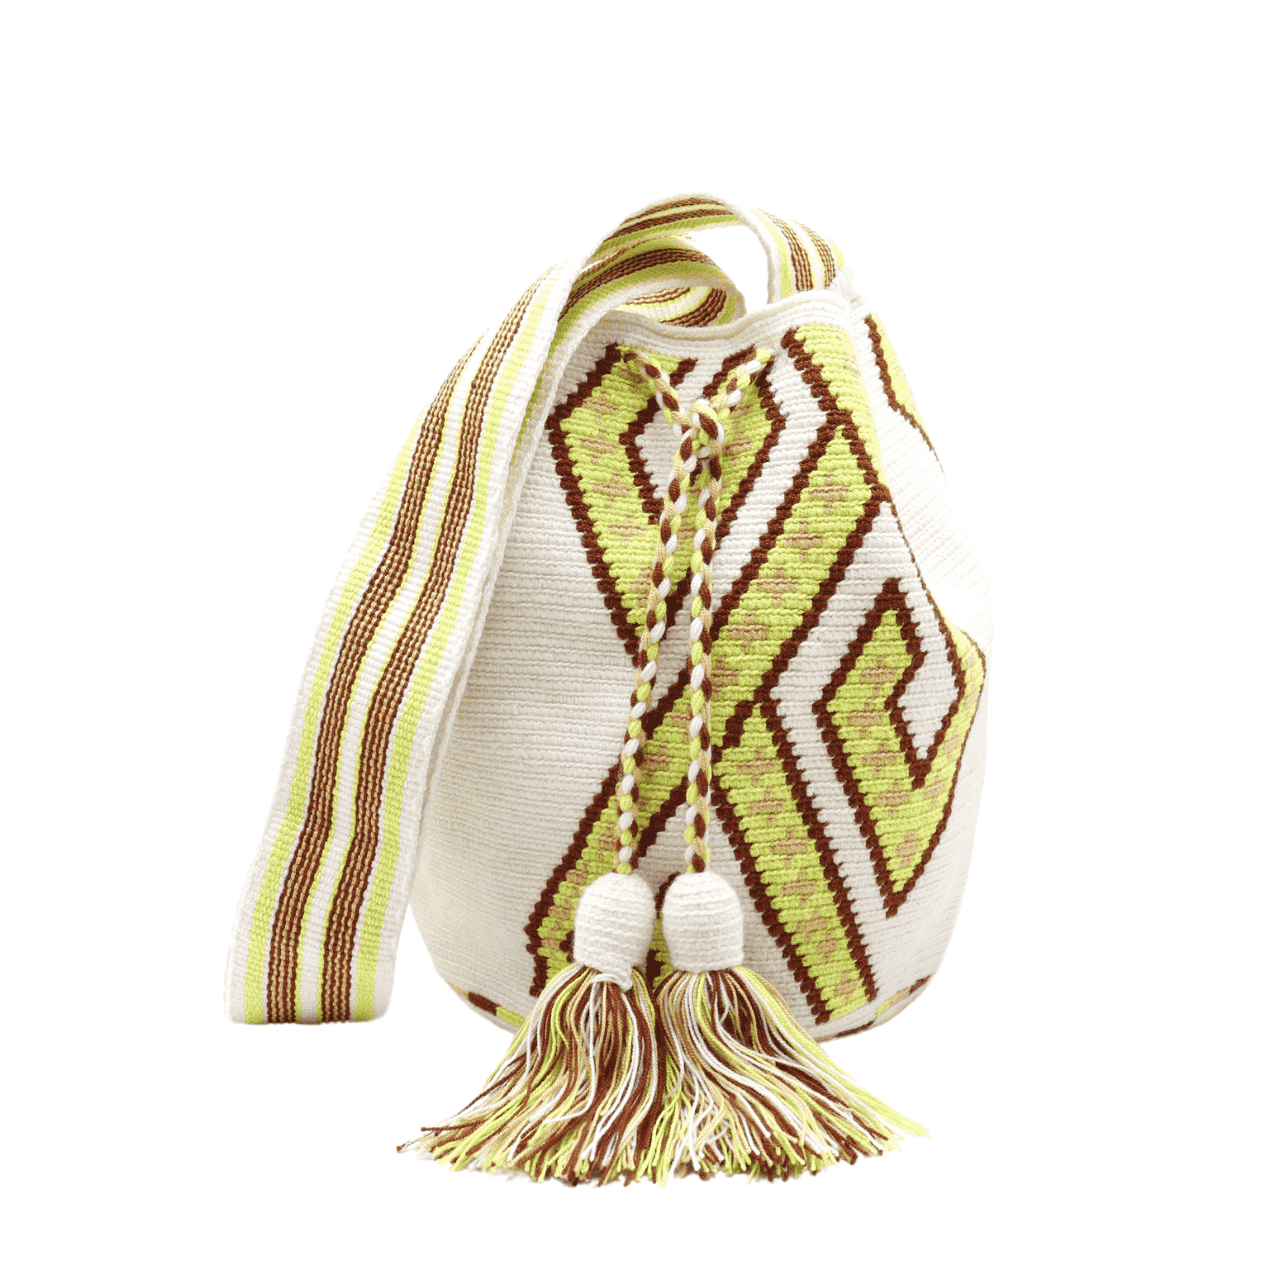 Exquisite handmade Alba best Wayuu bag in almond shades, adorned with olive greens and browns in intricate patterns. A true piece of art that exudes elegance and sophistication.